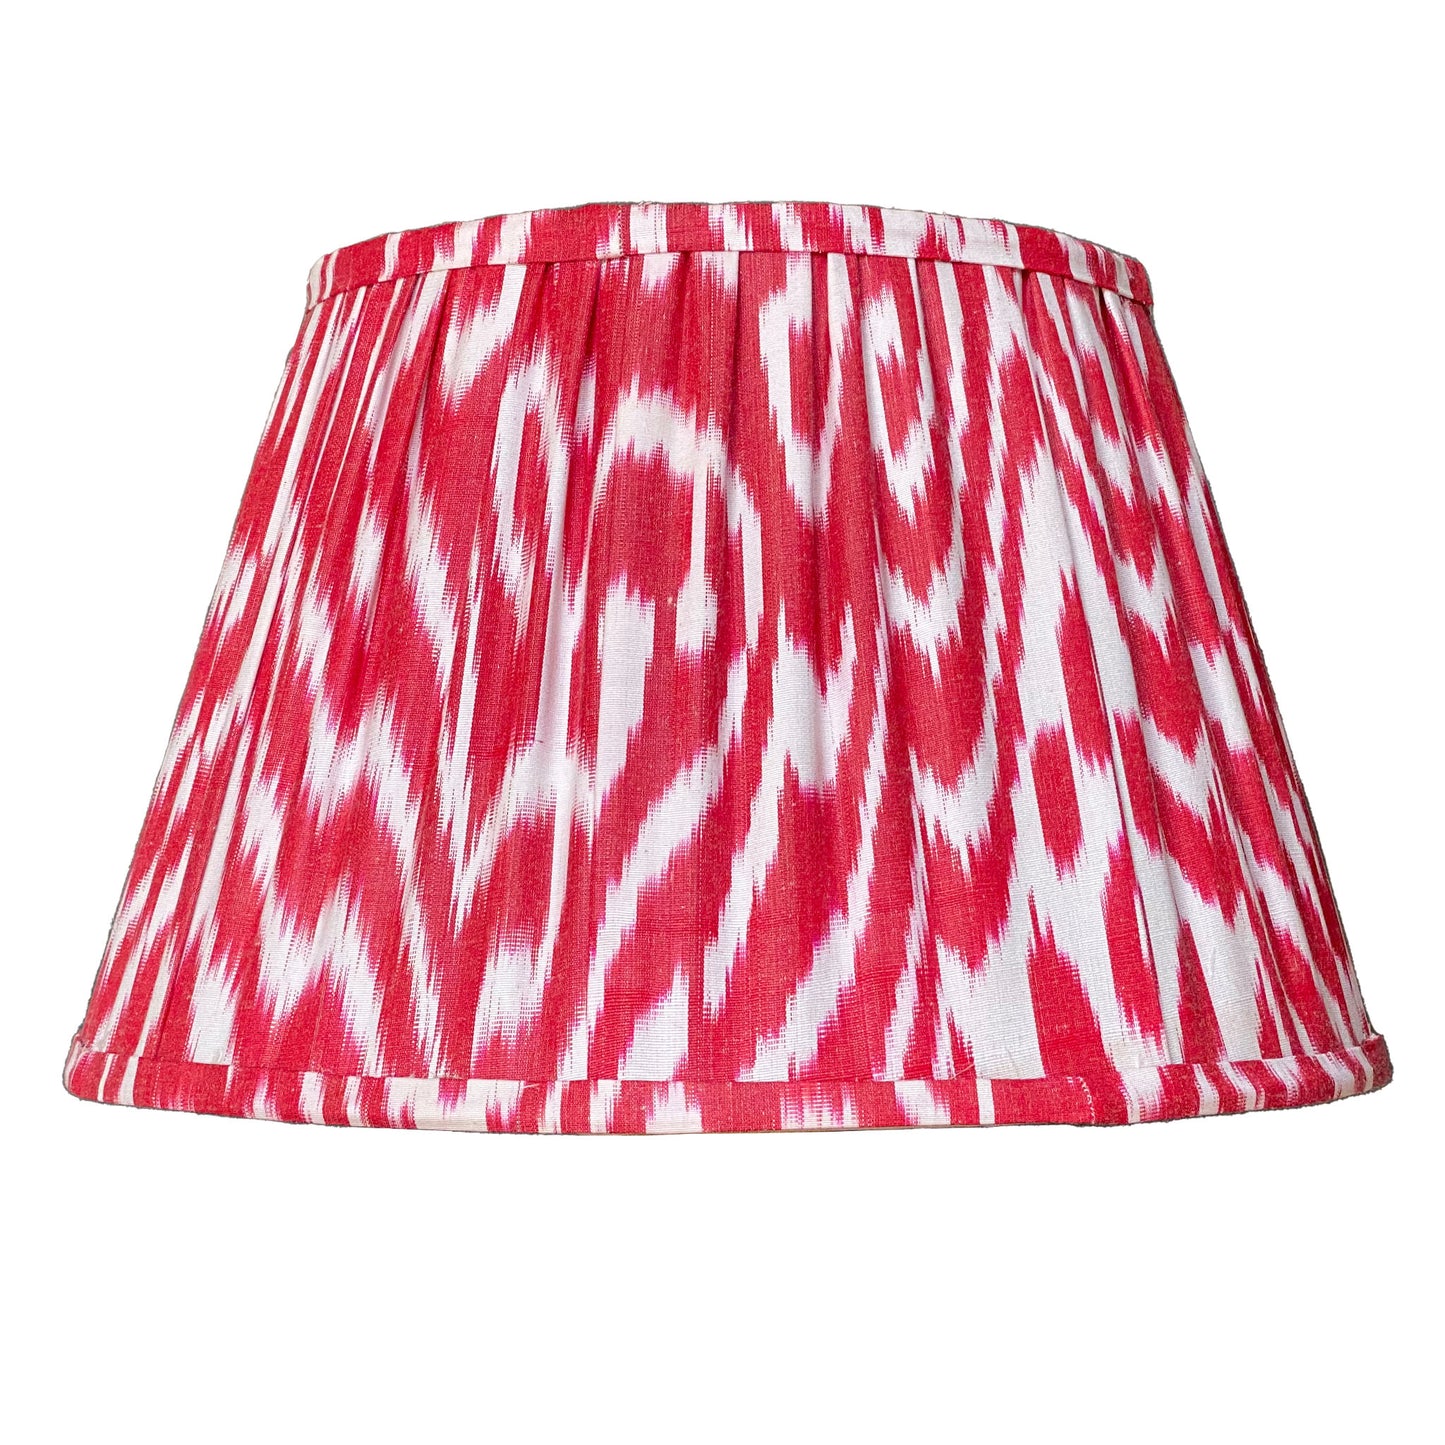 Red and white ikat silk lampshade cutout